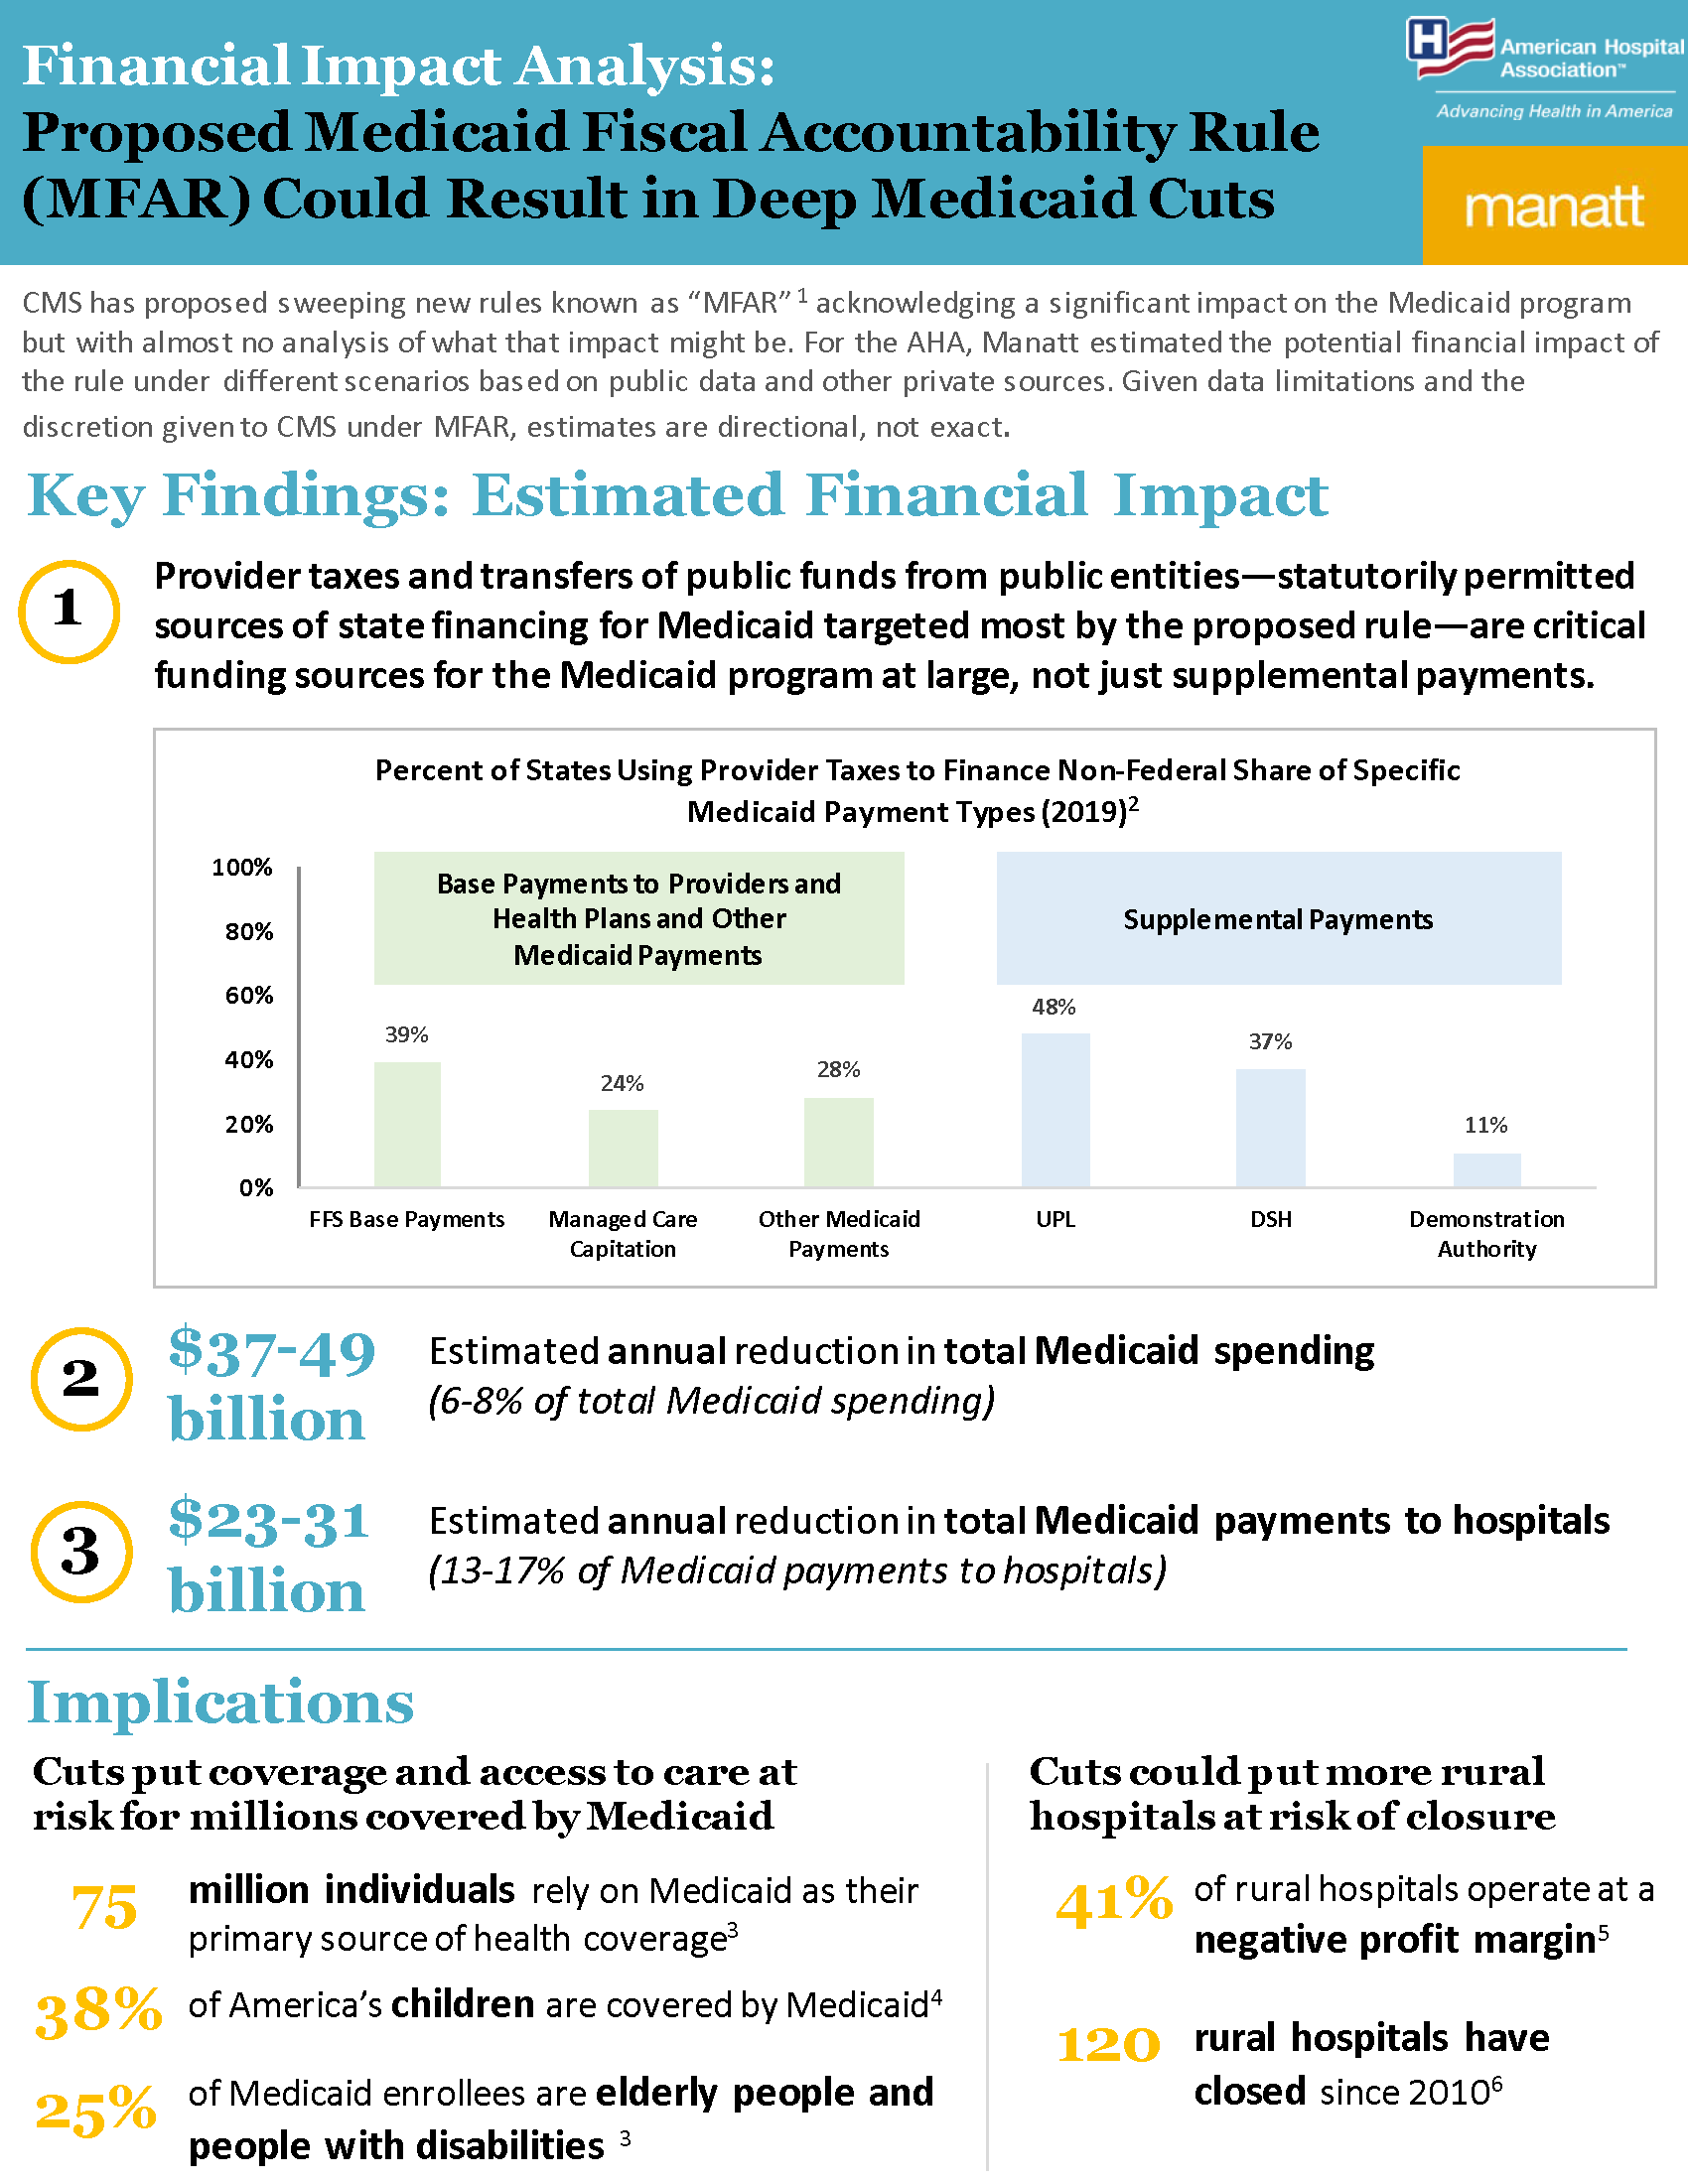 Financial Impact Analysis: Proposed Medicaid Fiscal Accountability Rule (MFAR) Could Result in Deep Medicaid Cuts Infographic page 1